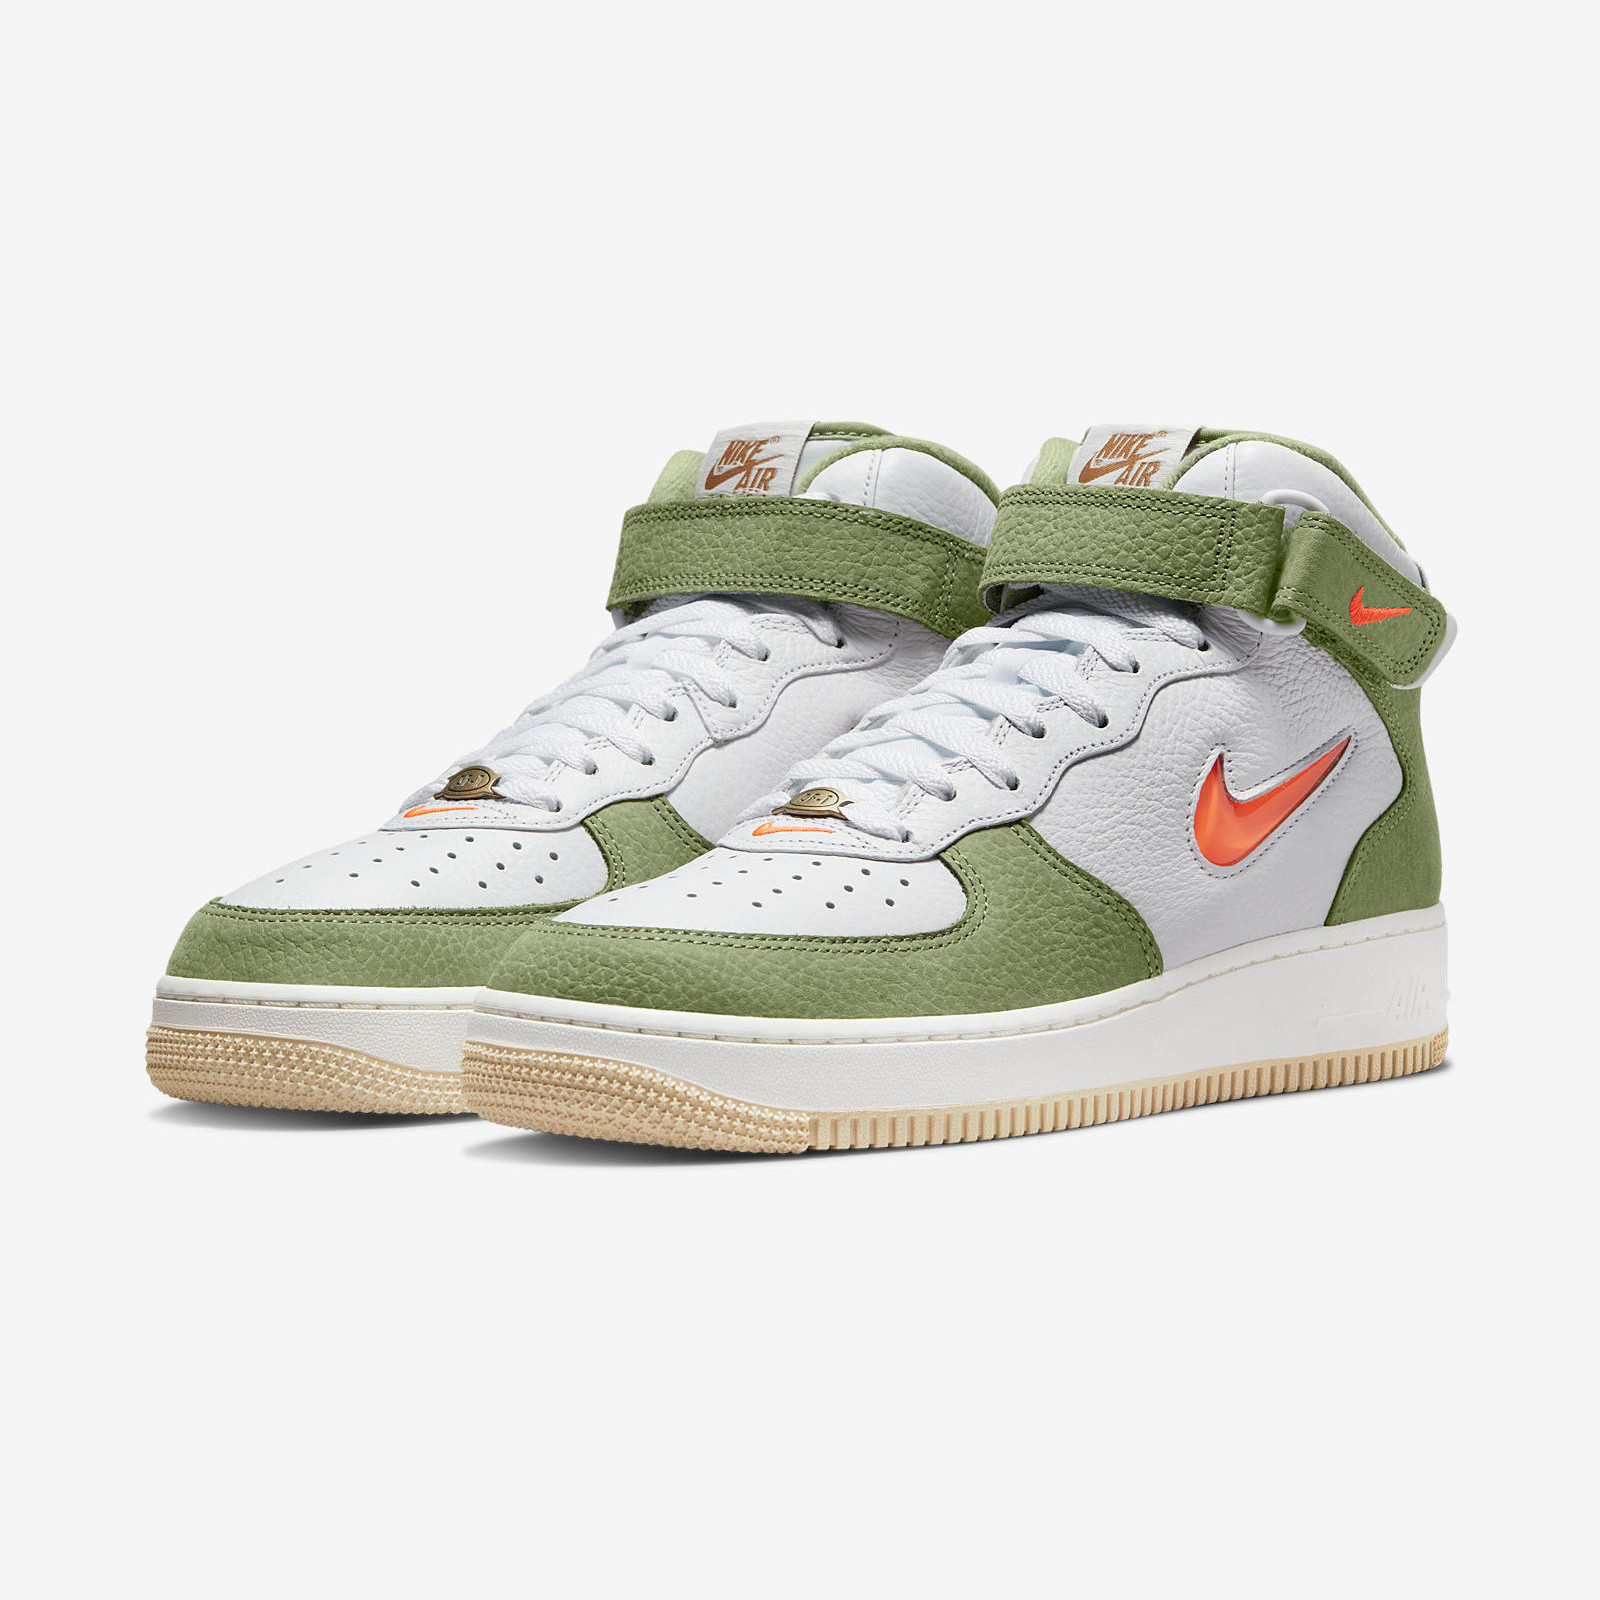 Nike Air Force 1 Mid
« Olive Green »